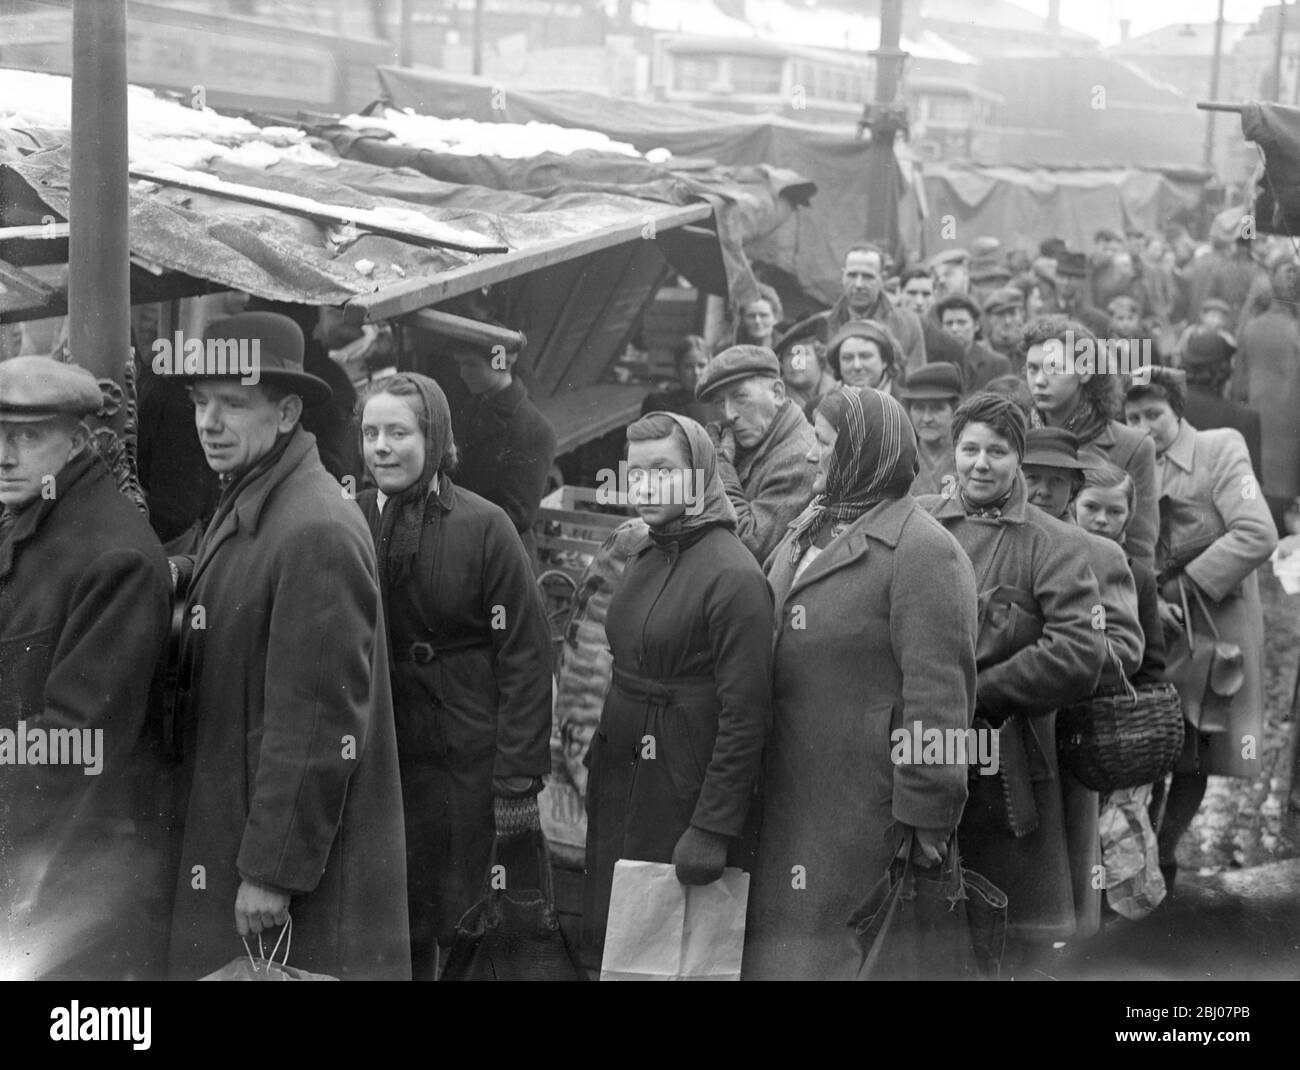 The weather brings a shortage of potatoes . The supplies of potatotes have been seriously menaced by the weather, owing to farmers being unable to open up clamps . A queue for potatoes seen at Beresford Square , Woolwich - 8 March 1947 Stock Photo